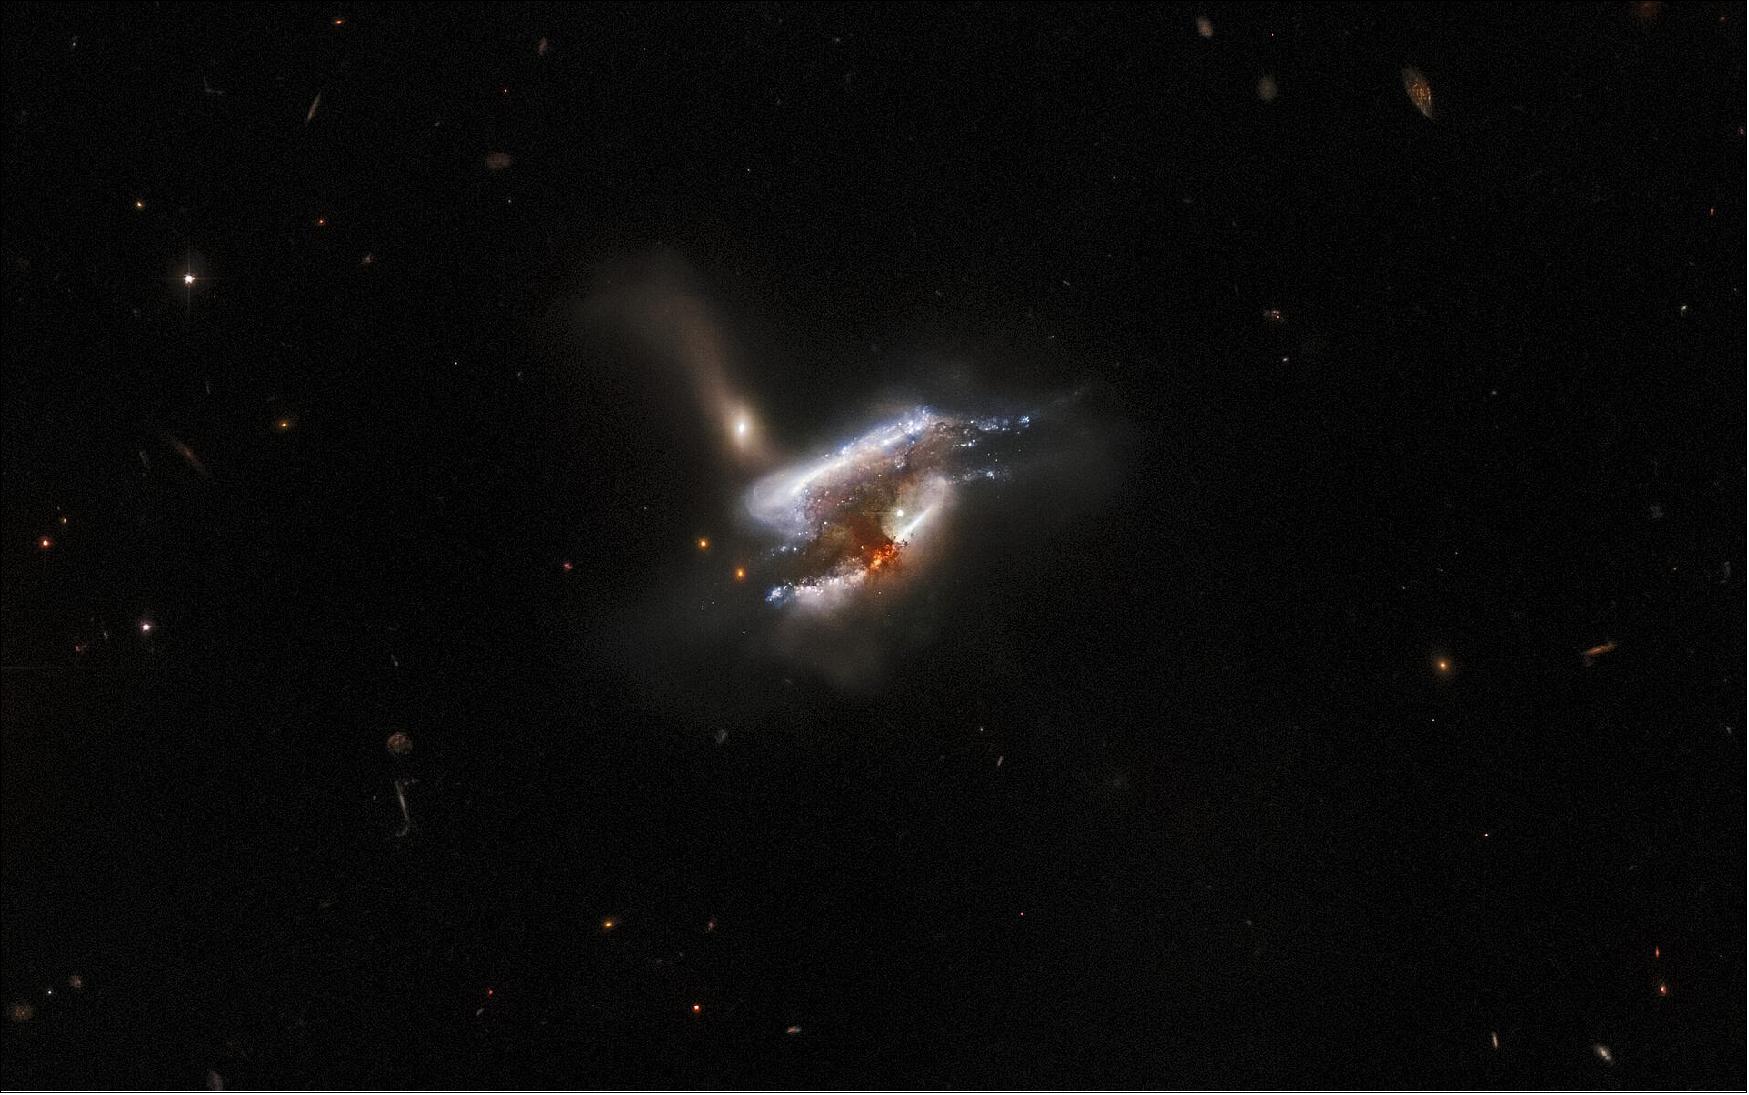 Figure 72: This image is from a series of Hubble observations investigating weird and wonderful galaxies found by the Galaxy Zoo citizen science project. Using Hubble’s powerful Advanced Camera for Surveys (ACS), astronomers took a closer look at some of the more unusual galaxies that volunteers had identified. The original Galaxy Zoo project was the largest galaxy census ever carried out, and relied on crowdsourcing time from more than 100,000 volunteers to classify 900,000 unexamined galaxies. The project achieved what would have been years of work for a professional astronomer in only 175 days, and has led to a steady stream of similar astronomical citizen science projects. Later Galaxy Zoo projects have included the largest ever studies of galaxy mergers and tidal dwarf galaxies, as well as the discovery of entirely new types of compact star-forming galaxies (image credit: ESA/Hubble & NASA, W. Keel, Dark Energy Survey, DOE, FNAL, DECam, CTIO, NOIRLab/NSF/AURA, SDSS; CC BY 4.0 Acknowledgement: J. Schmidt)